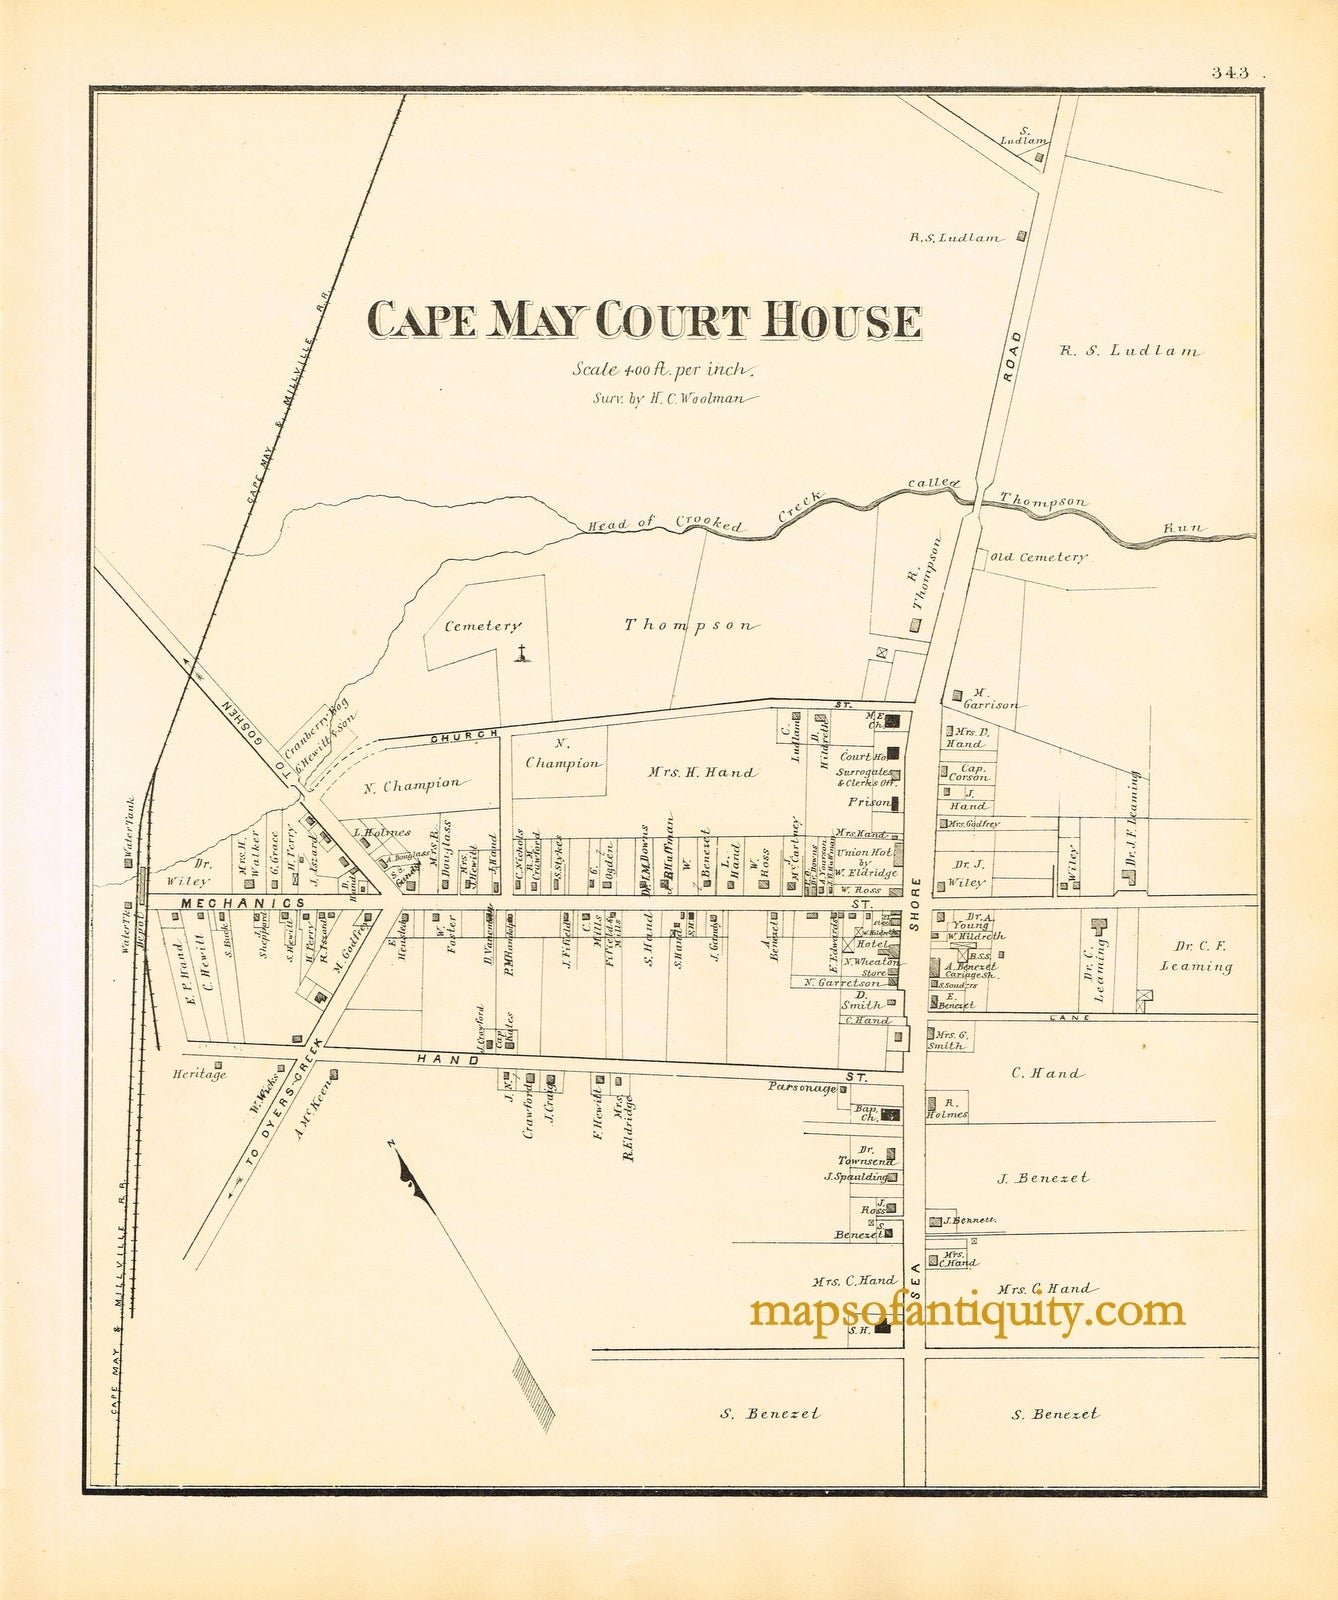 Black-and-White-Engraved-Antique-Map-Cape-May-Court-House-N.J.-United-States-New-Jersey-1878-Woolman-&-Rose-Maps-Of-Antiquity